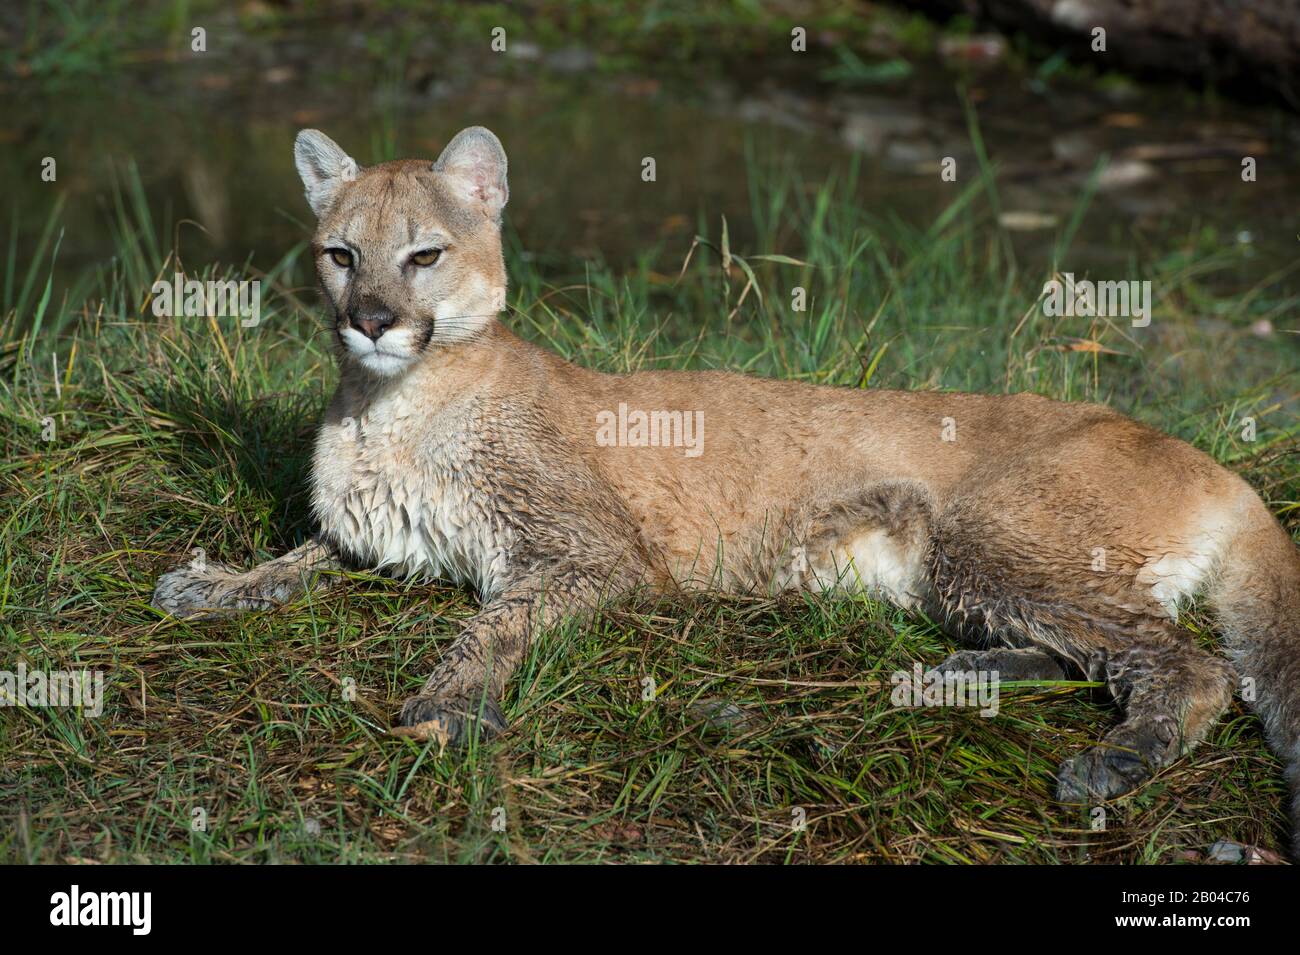 Young cougar (captive) laying in grass, Montana, United States. Stock Photo